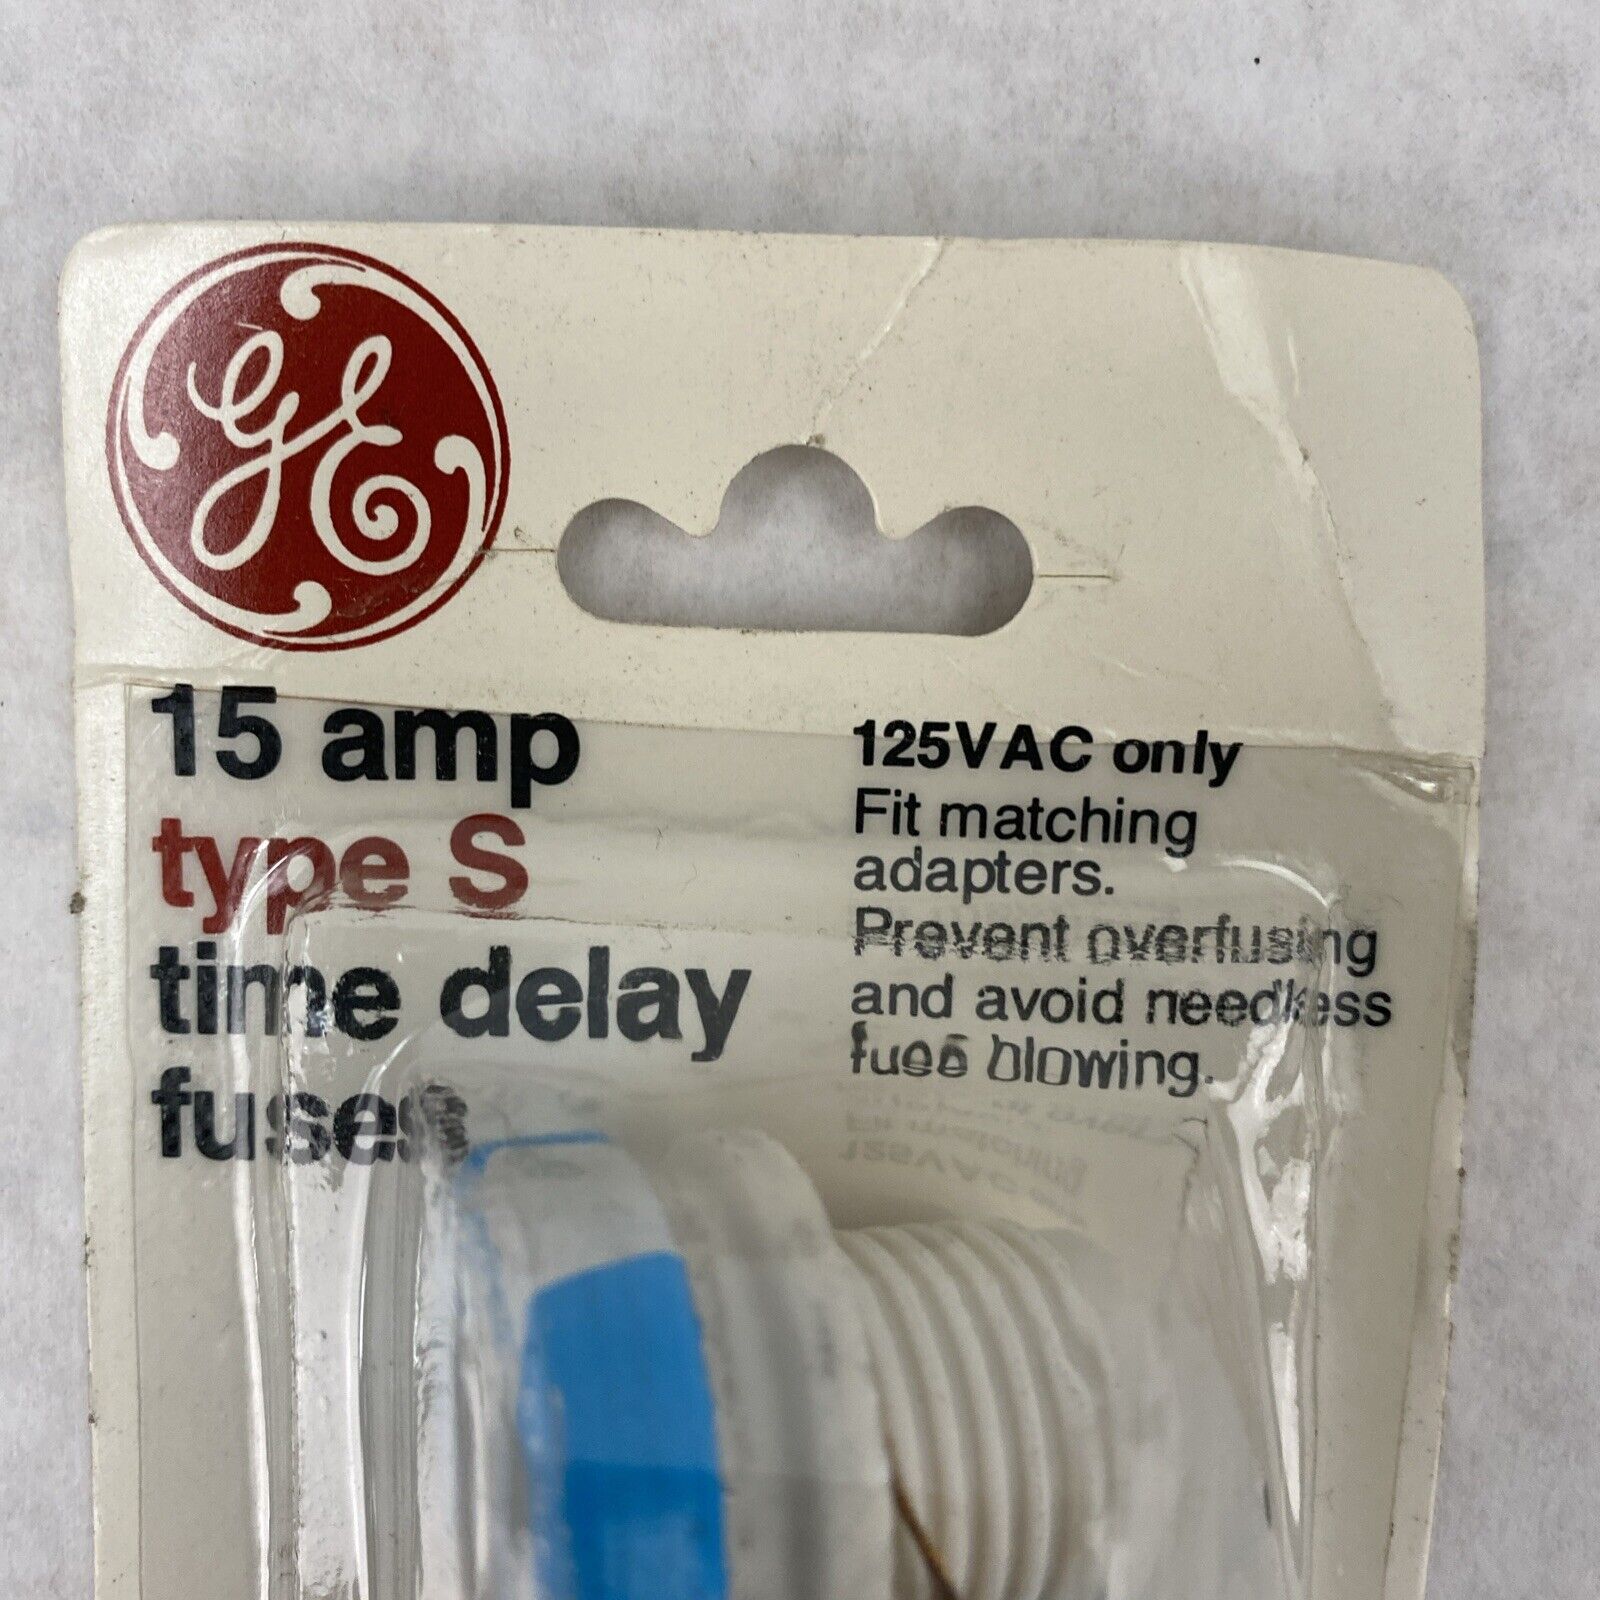 General Electric GE37315-3D MK-140 15 Amp D Type S Time Delay Fuses